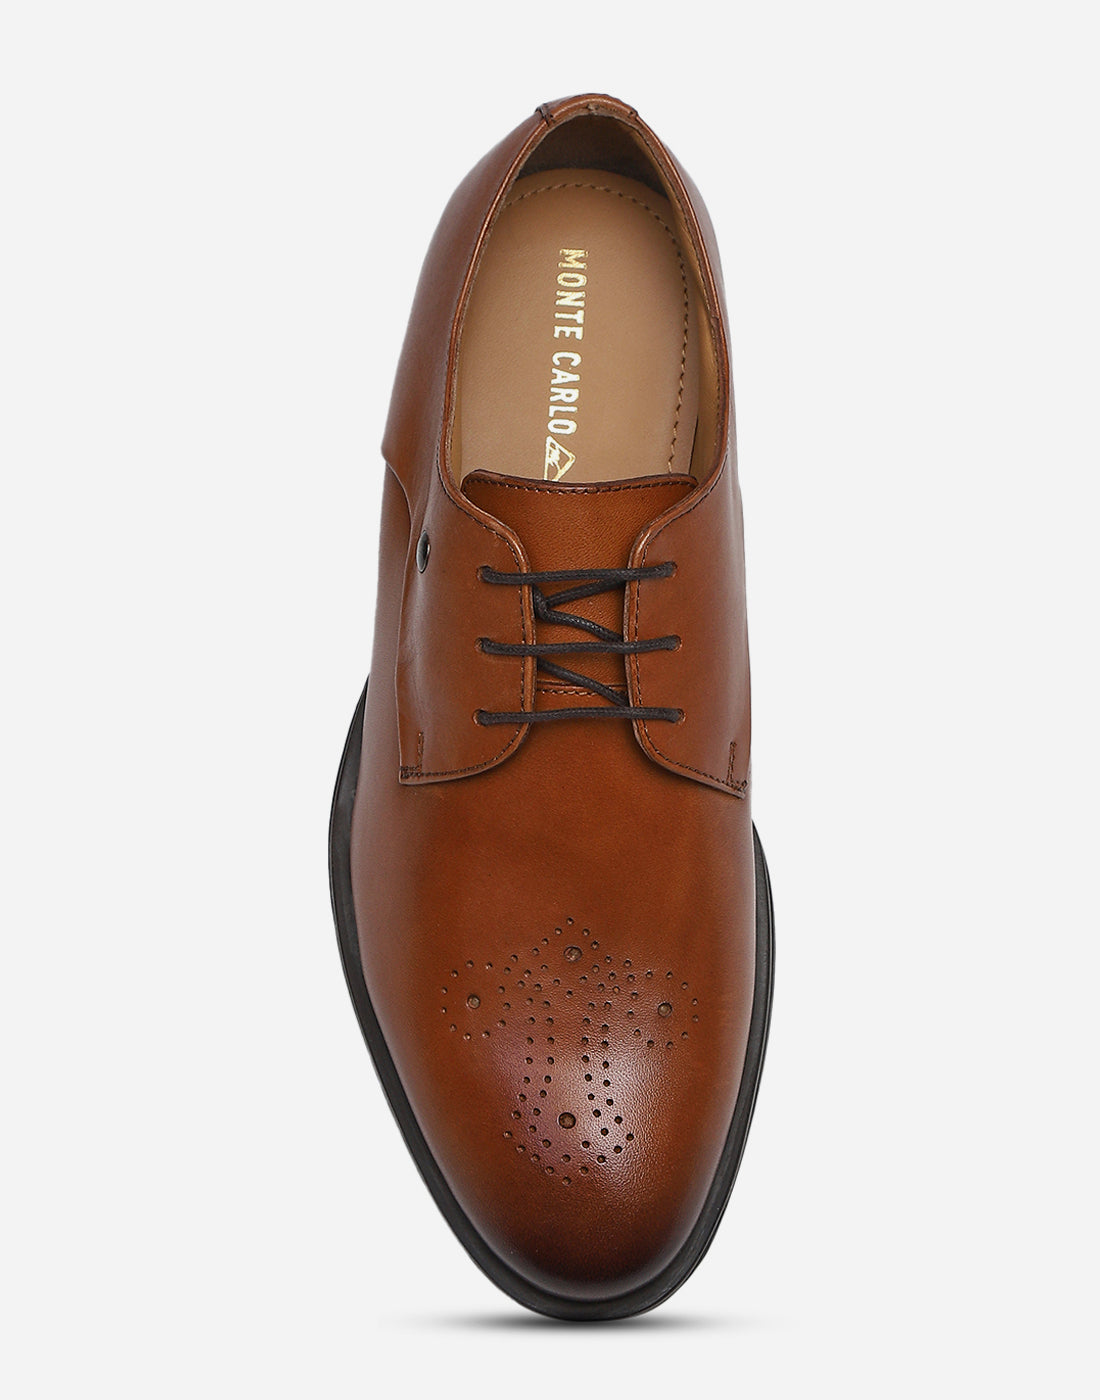 Men Tan Lace Up Genuine Leather Formal Brogues